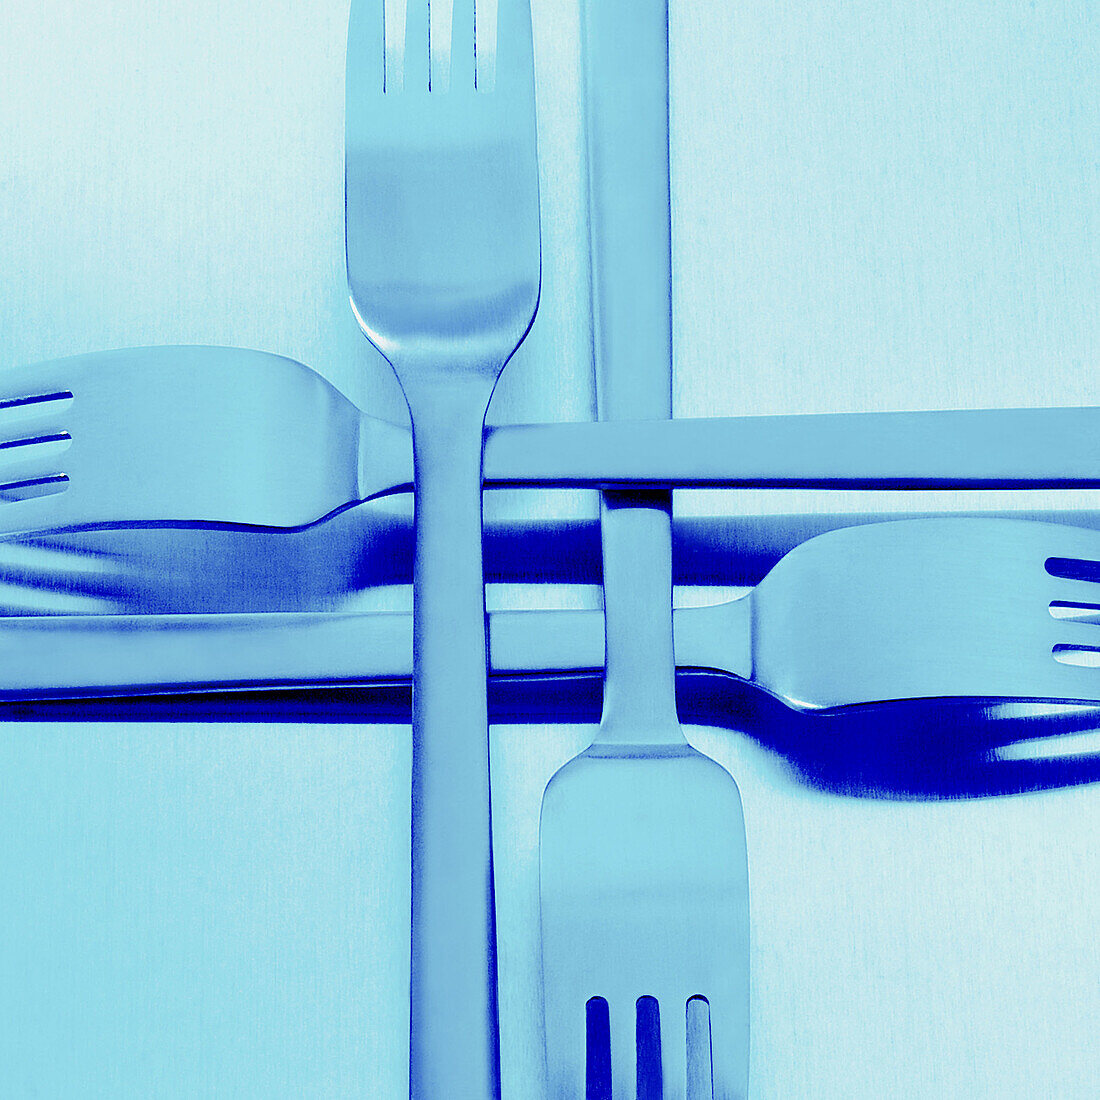 Blue, Blue tone, Close up, Close-up, Closeup, Color, Colour, Concept, Concepts, Cutlery, Food, Fork, Forks, Four, Four items, Gastronomy, Metal, Nourishment, Object, Objects, Pattern, Patterns, Shadow, Shadows, Silver, Still life, Thing, Things, Toned, T8